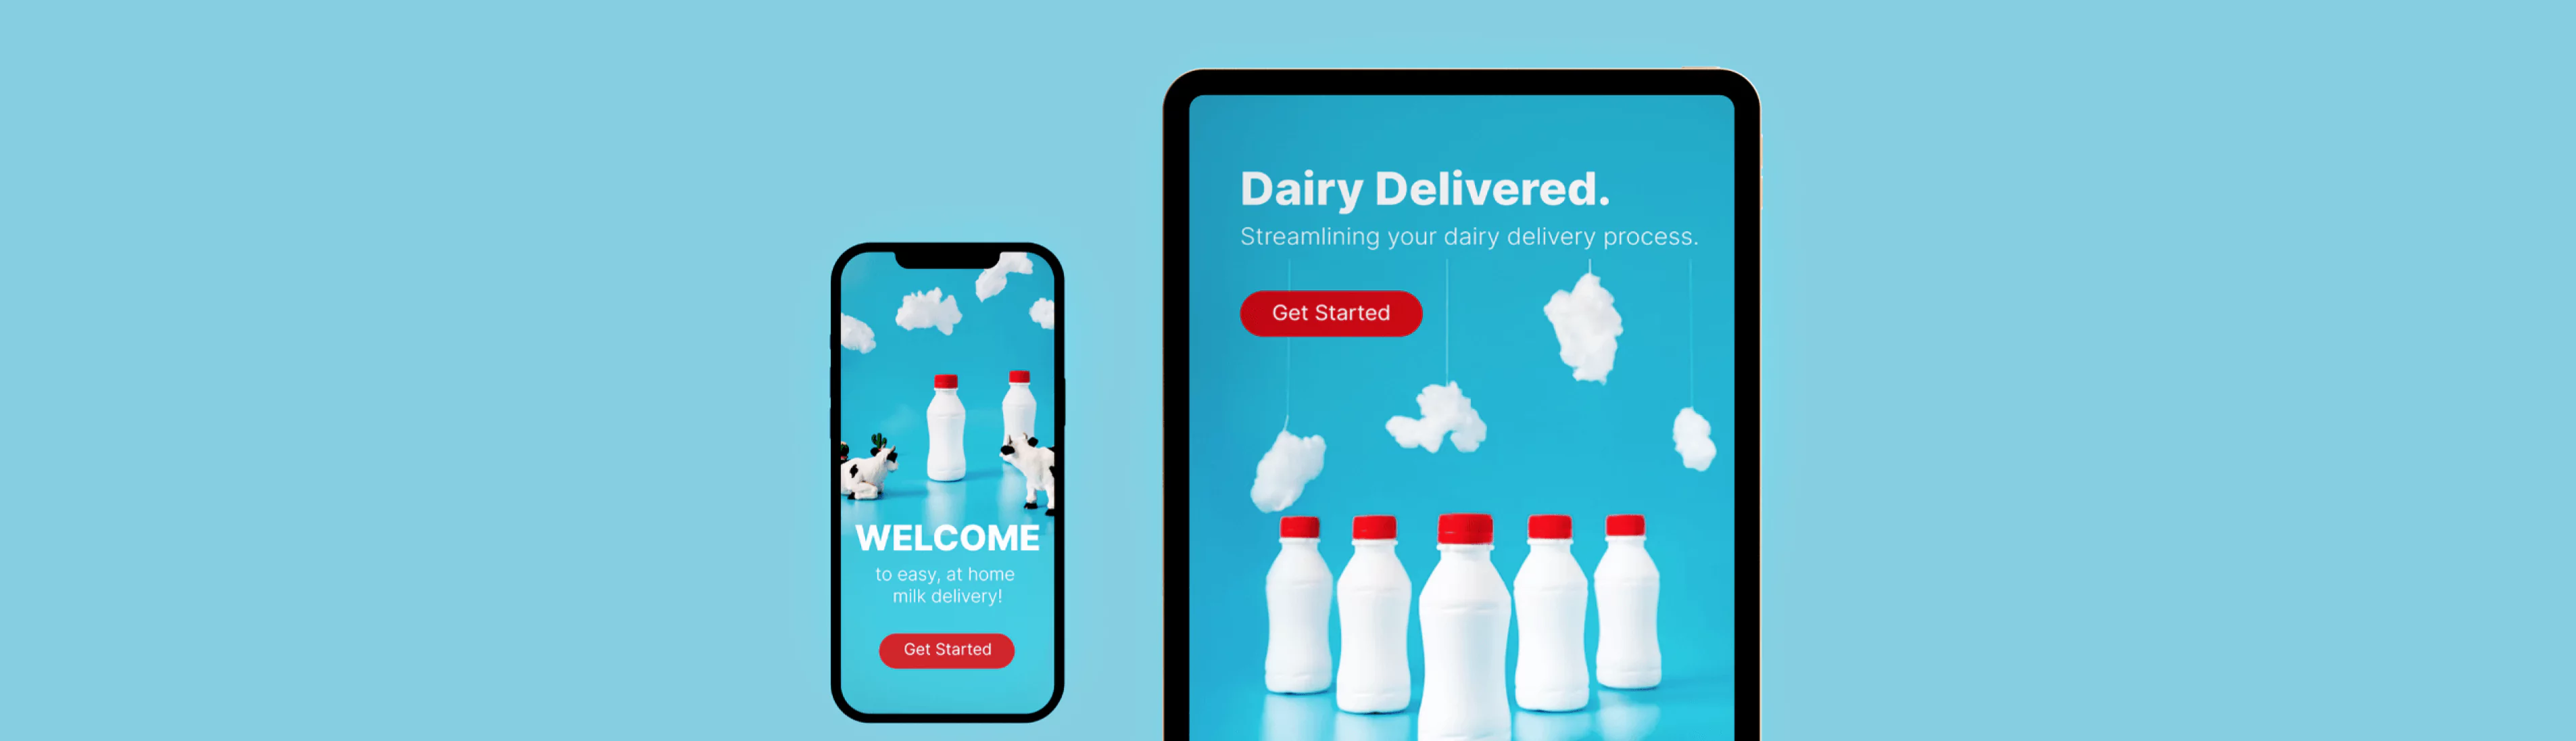 Delivery app UI shown on a light blue background